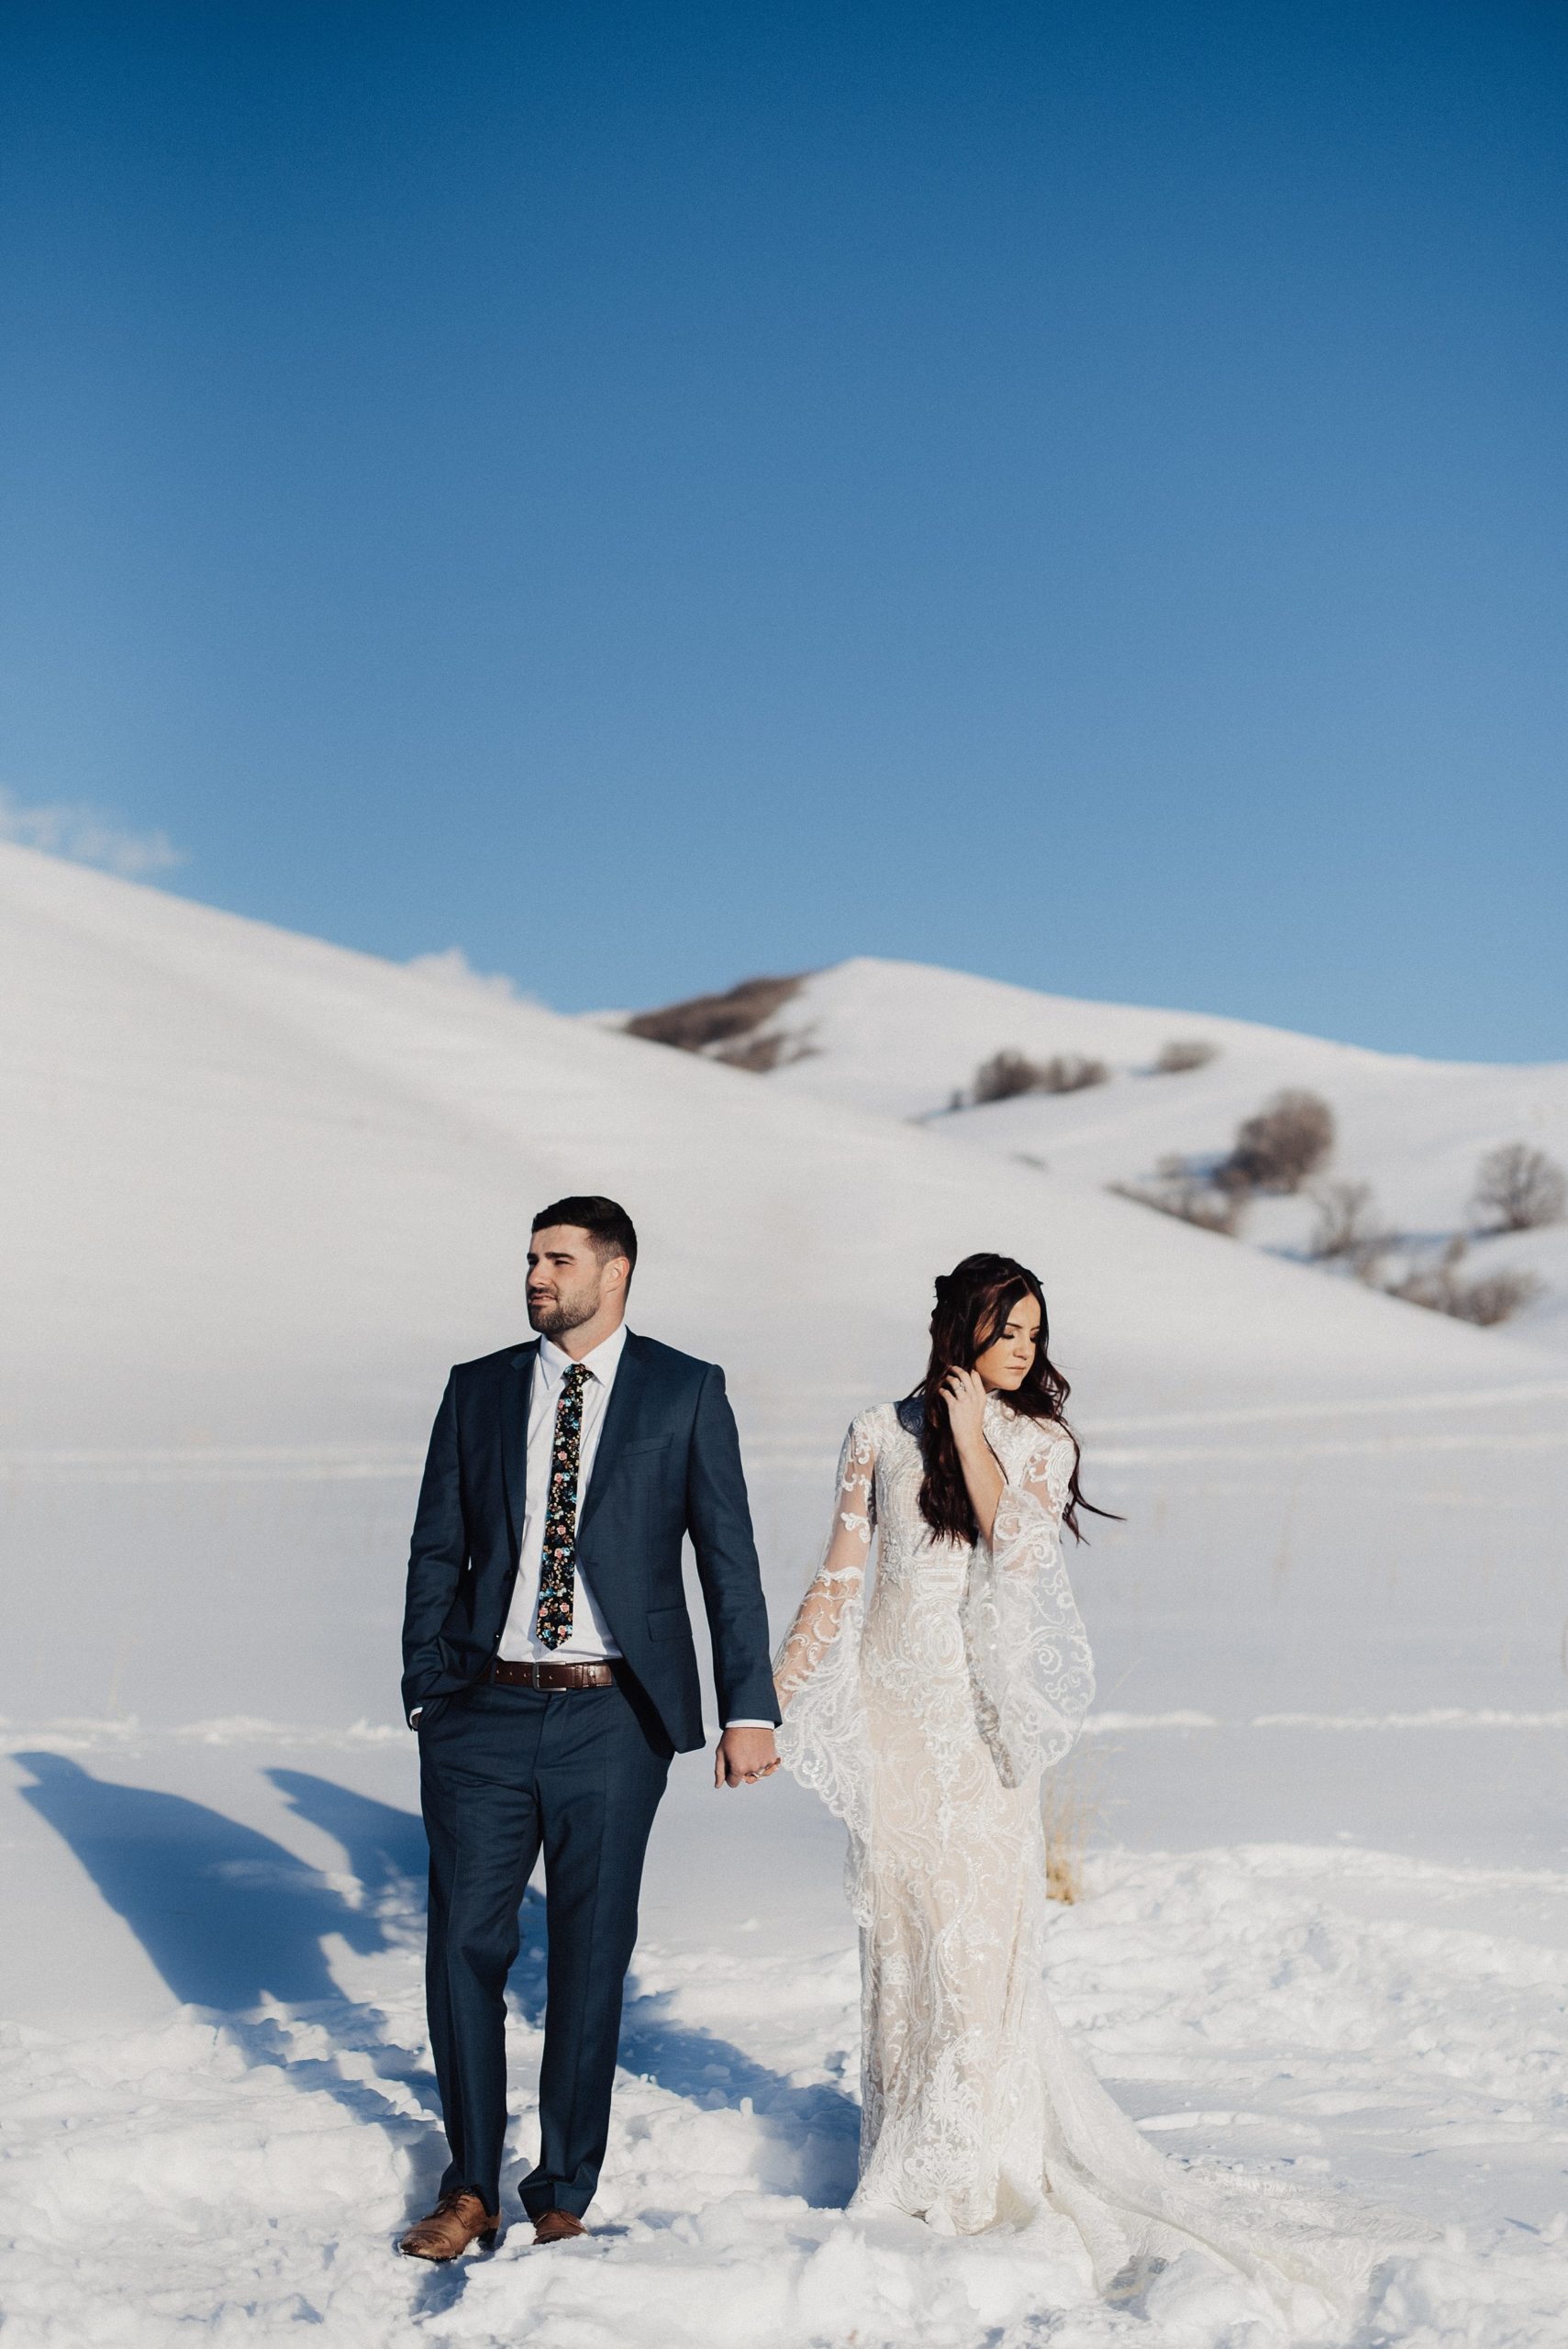 Bailey and Jordan, Winter Bridals at Tunnel Springs Park - Eden